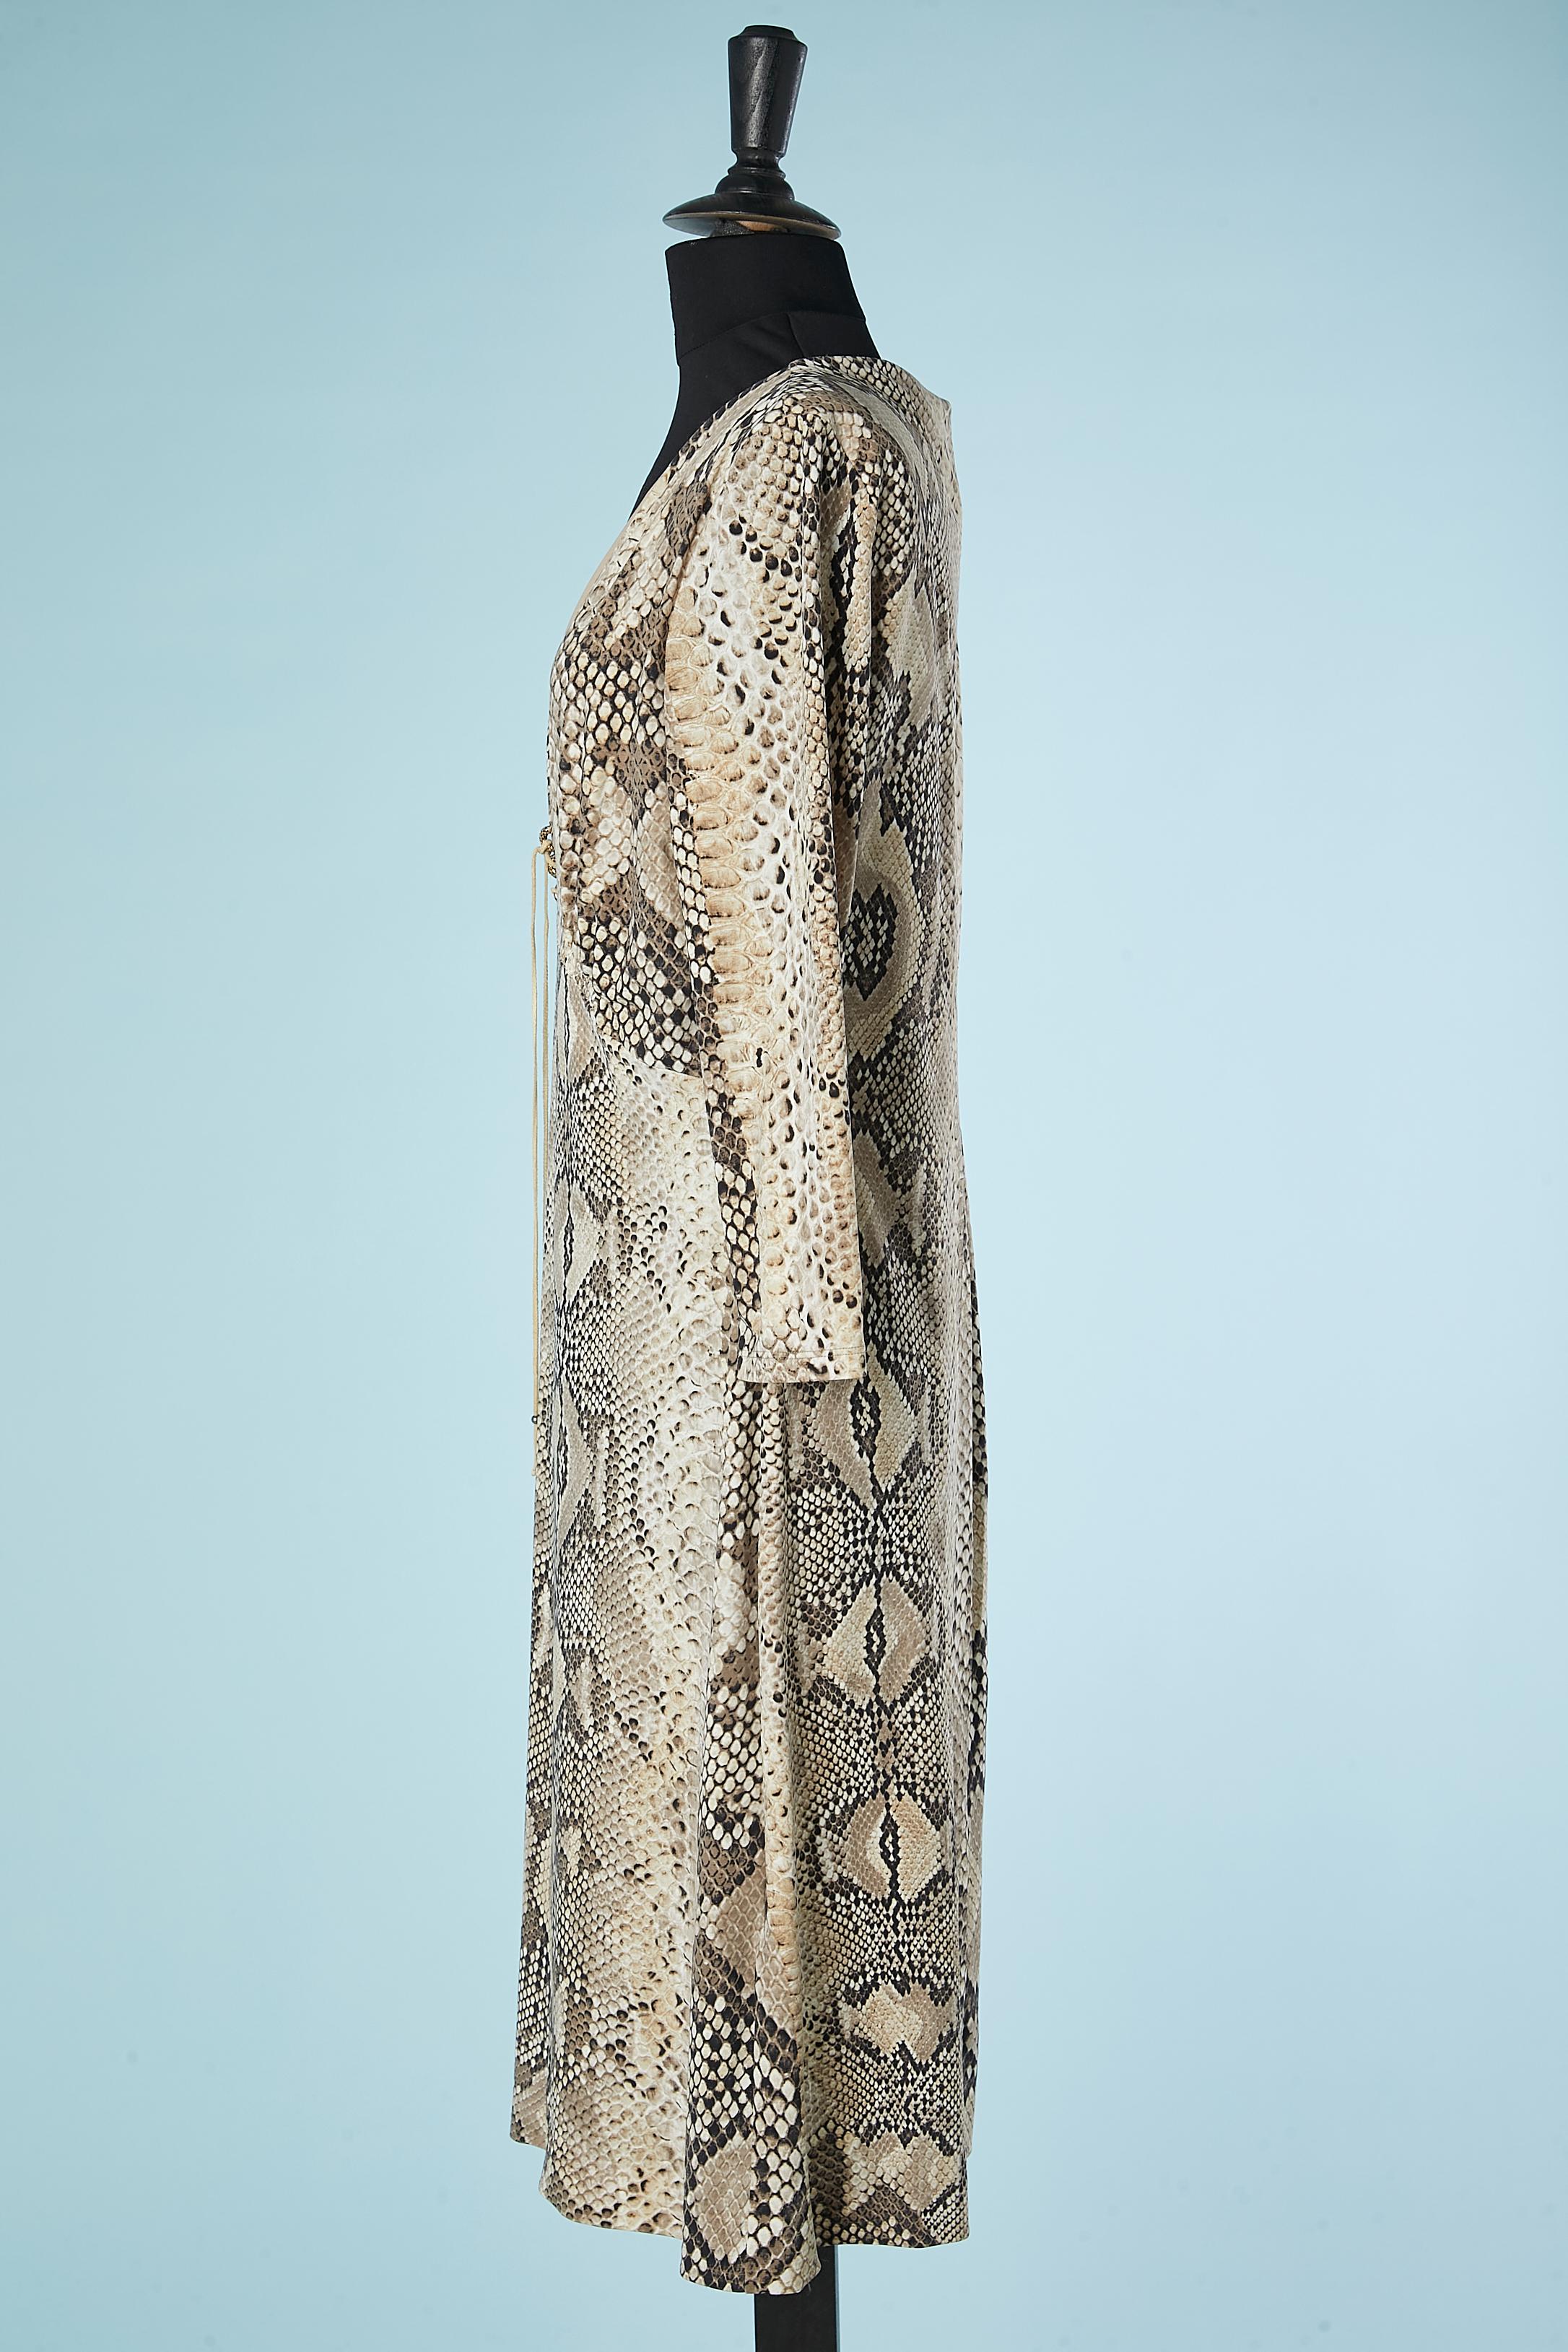 Animal print jersey dress with gold metal snake detail on bust Roberto Cavalli  In Excellent Condition For Sale In Saint-Ouen-Sur-Seine, FR